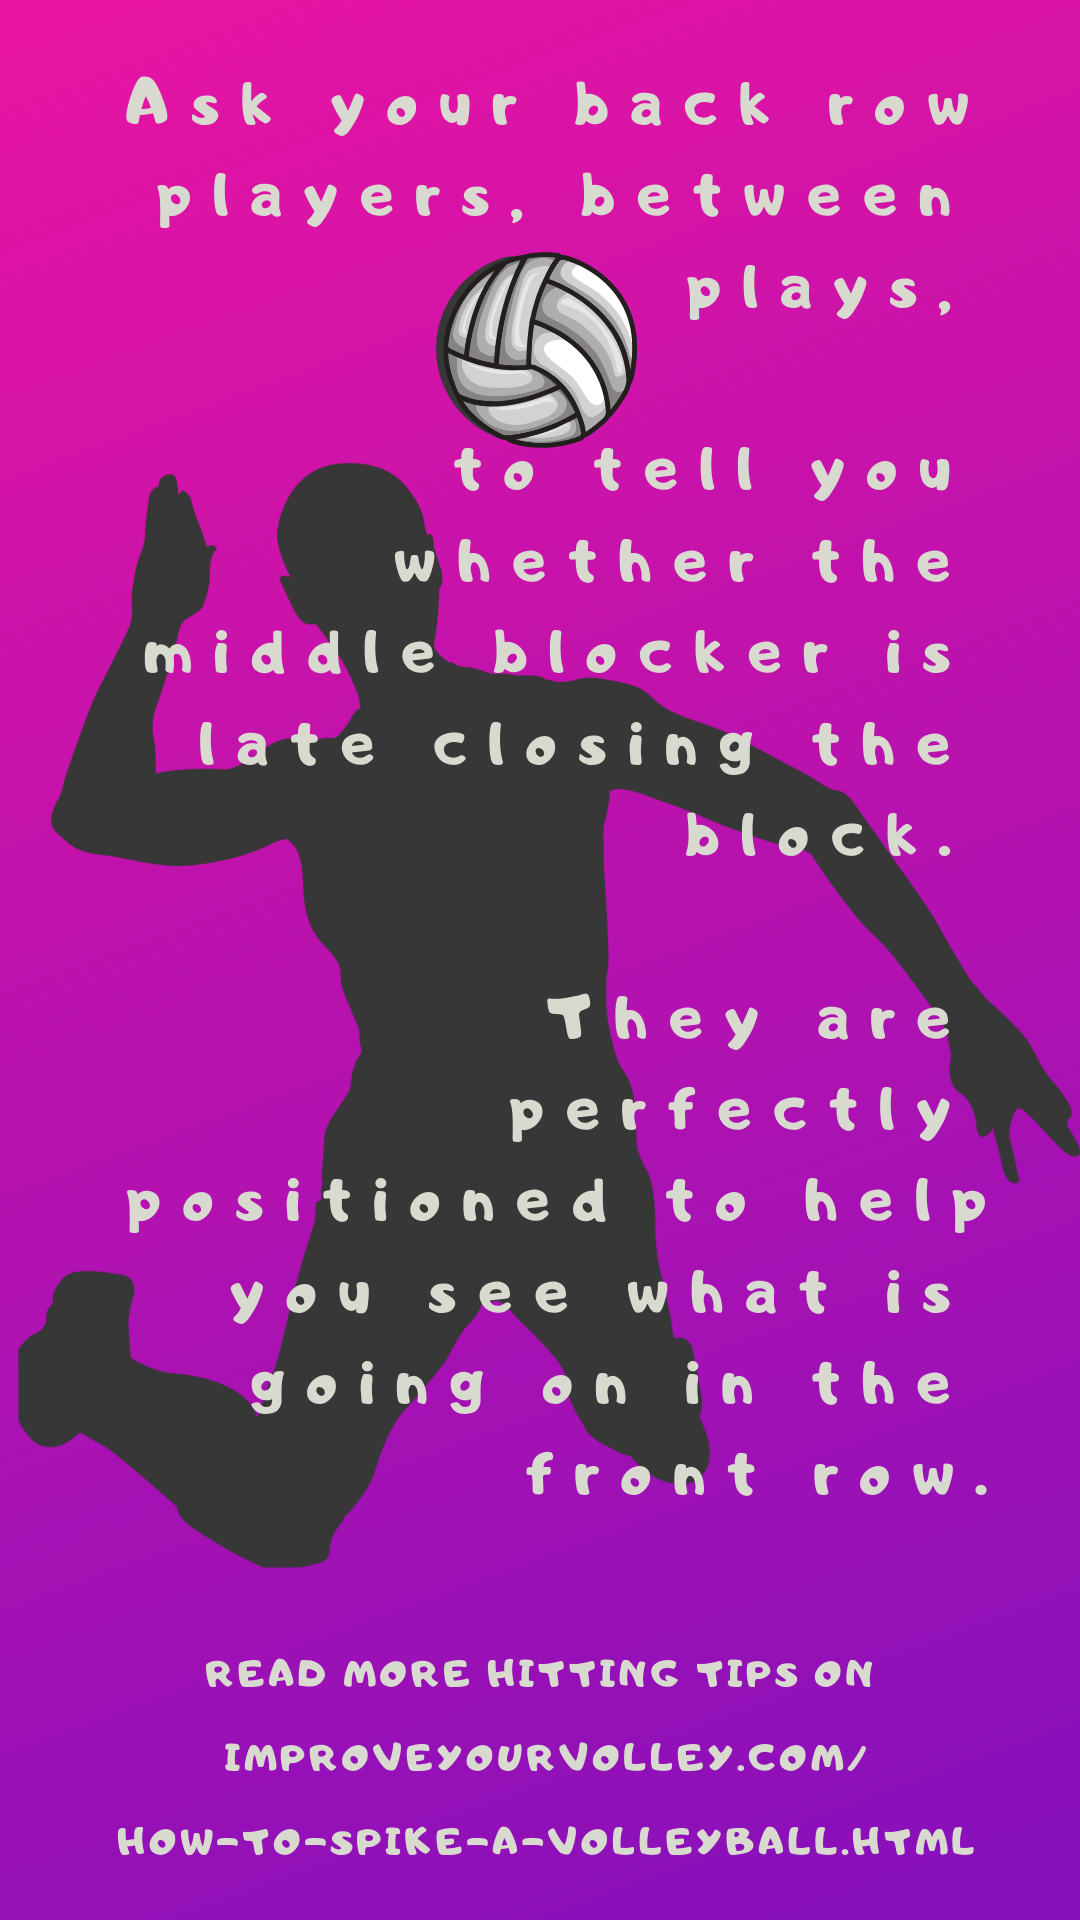 Ask your back row players, between plays, to tell you whether the middle blocker is late closing the block. They are perfectly positioned to help you see what is going on in the front row.